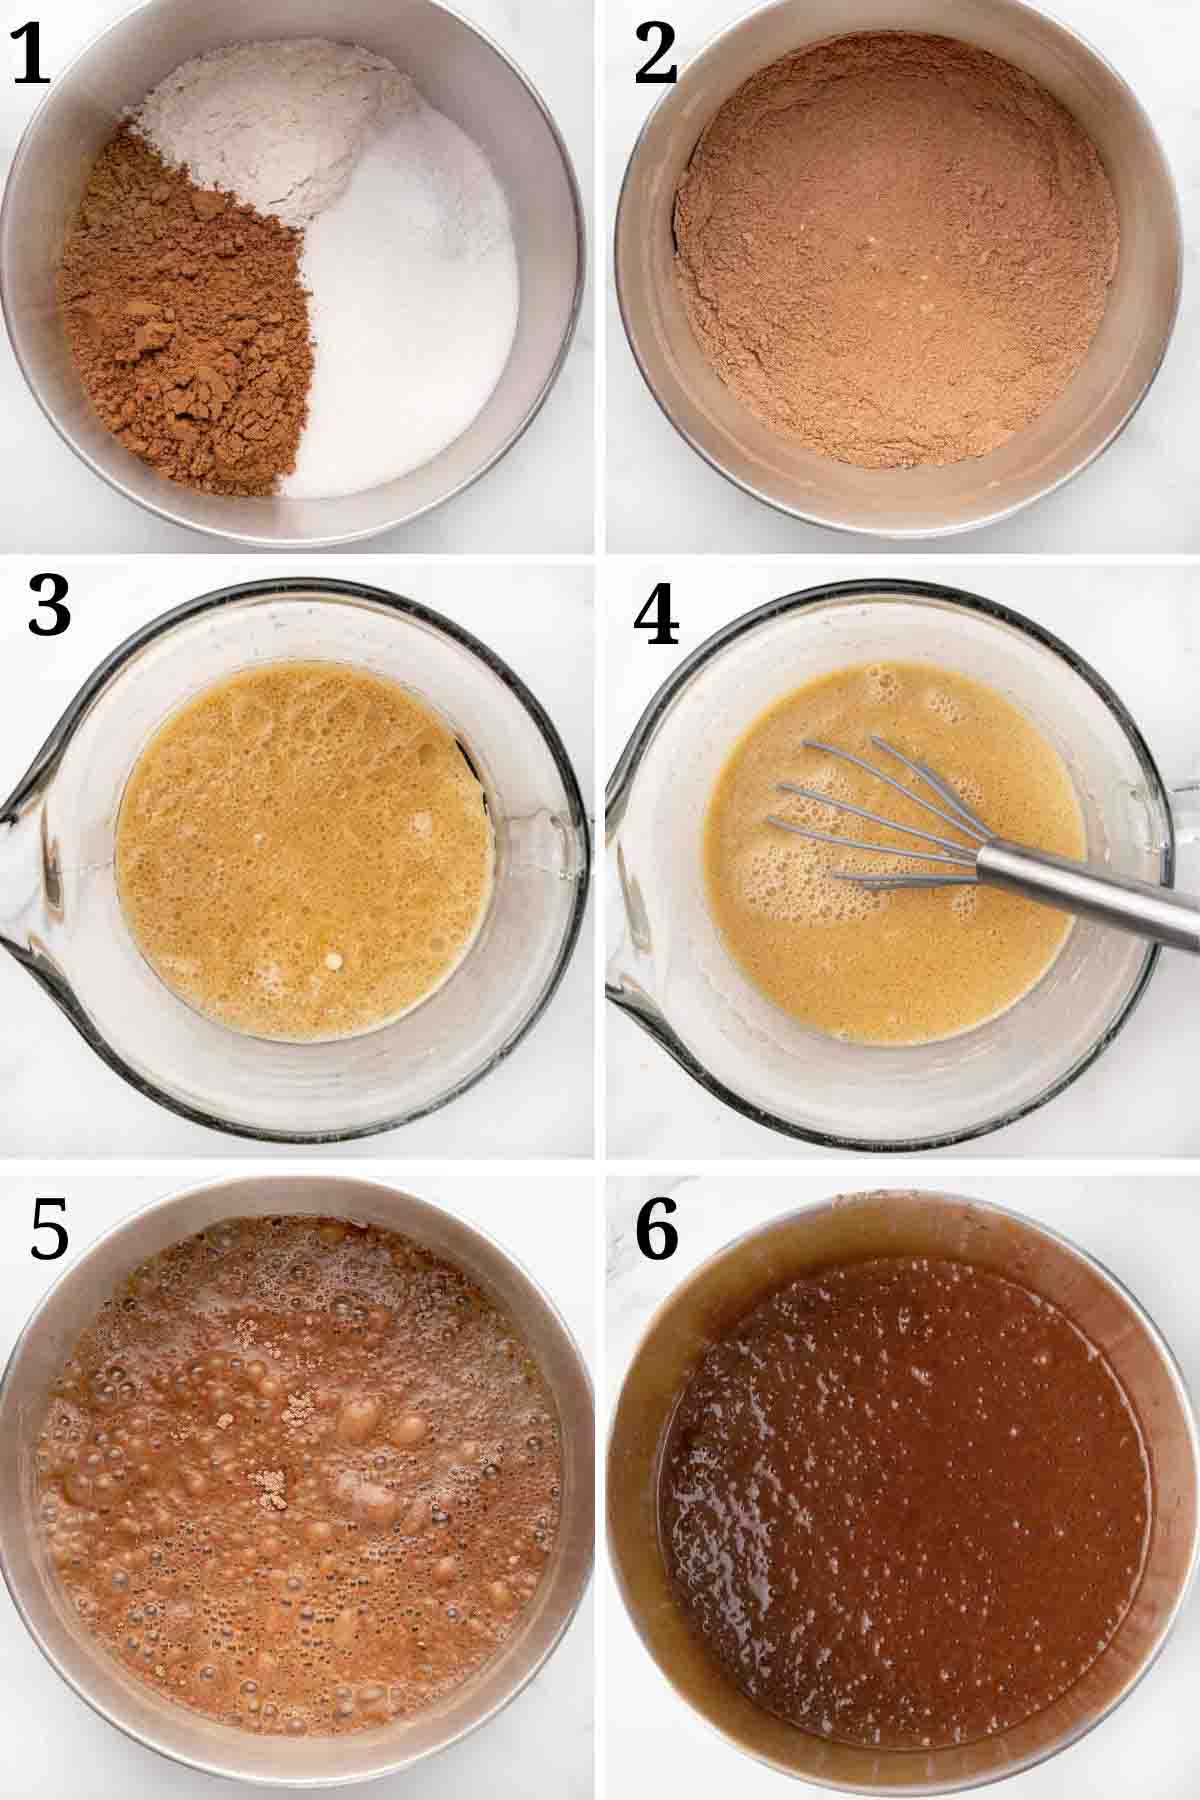 6 images showing how to make chocolate cake batter.